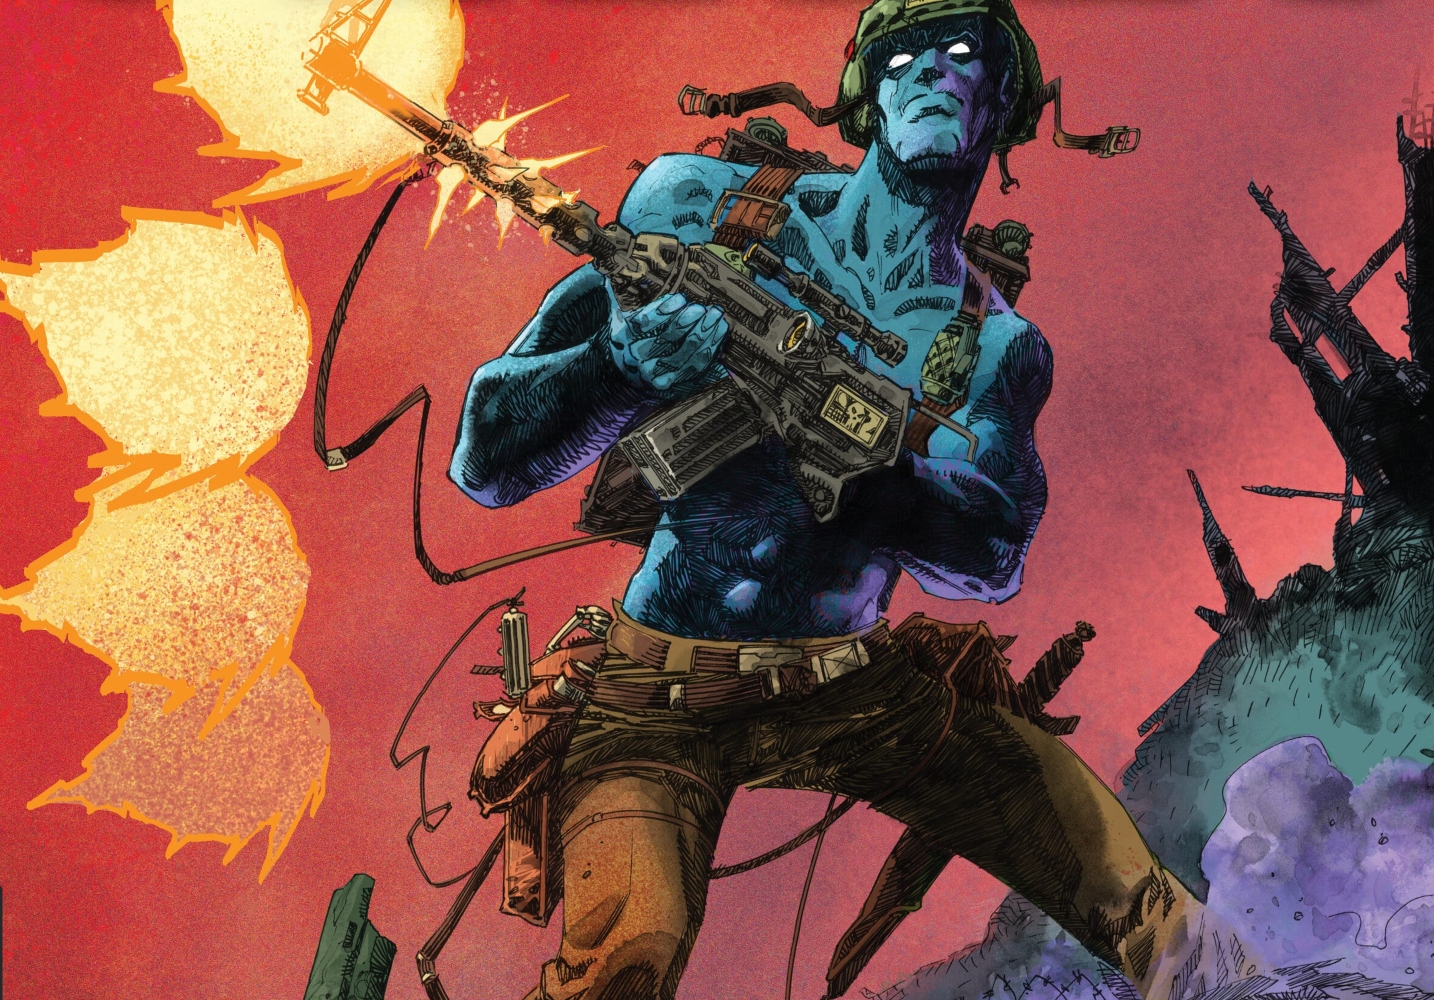 Geoffrey D. Wessel and Dan Cornwell talk action and politics in new 'Rogue Trooper' story